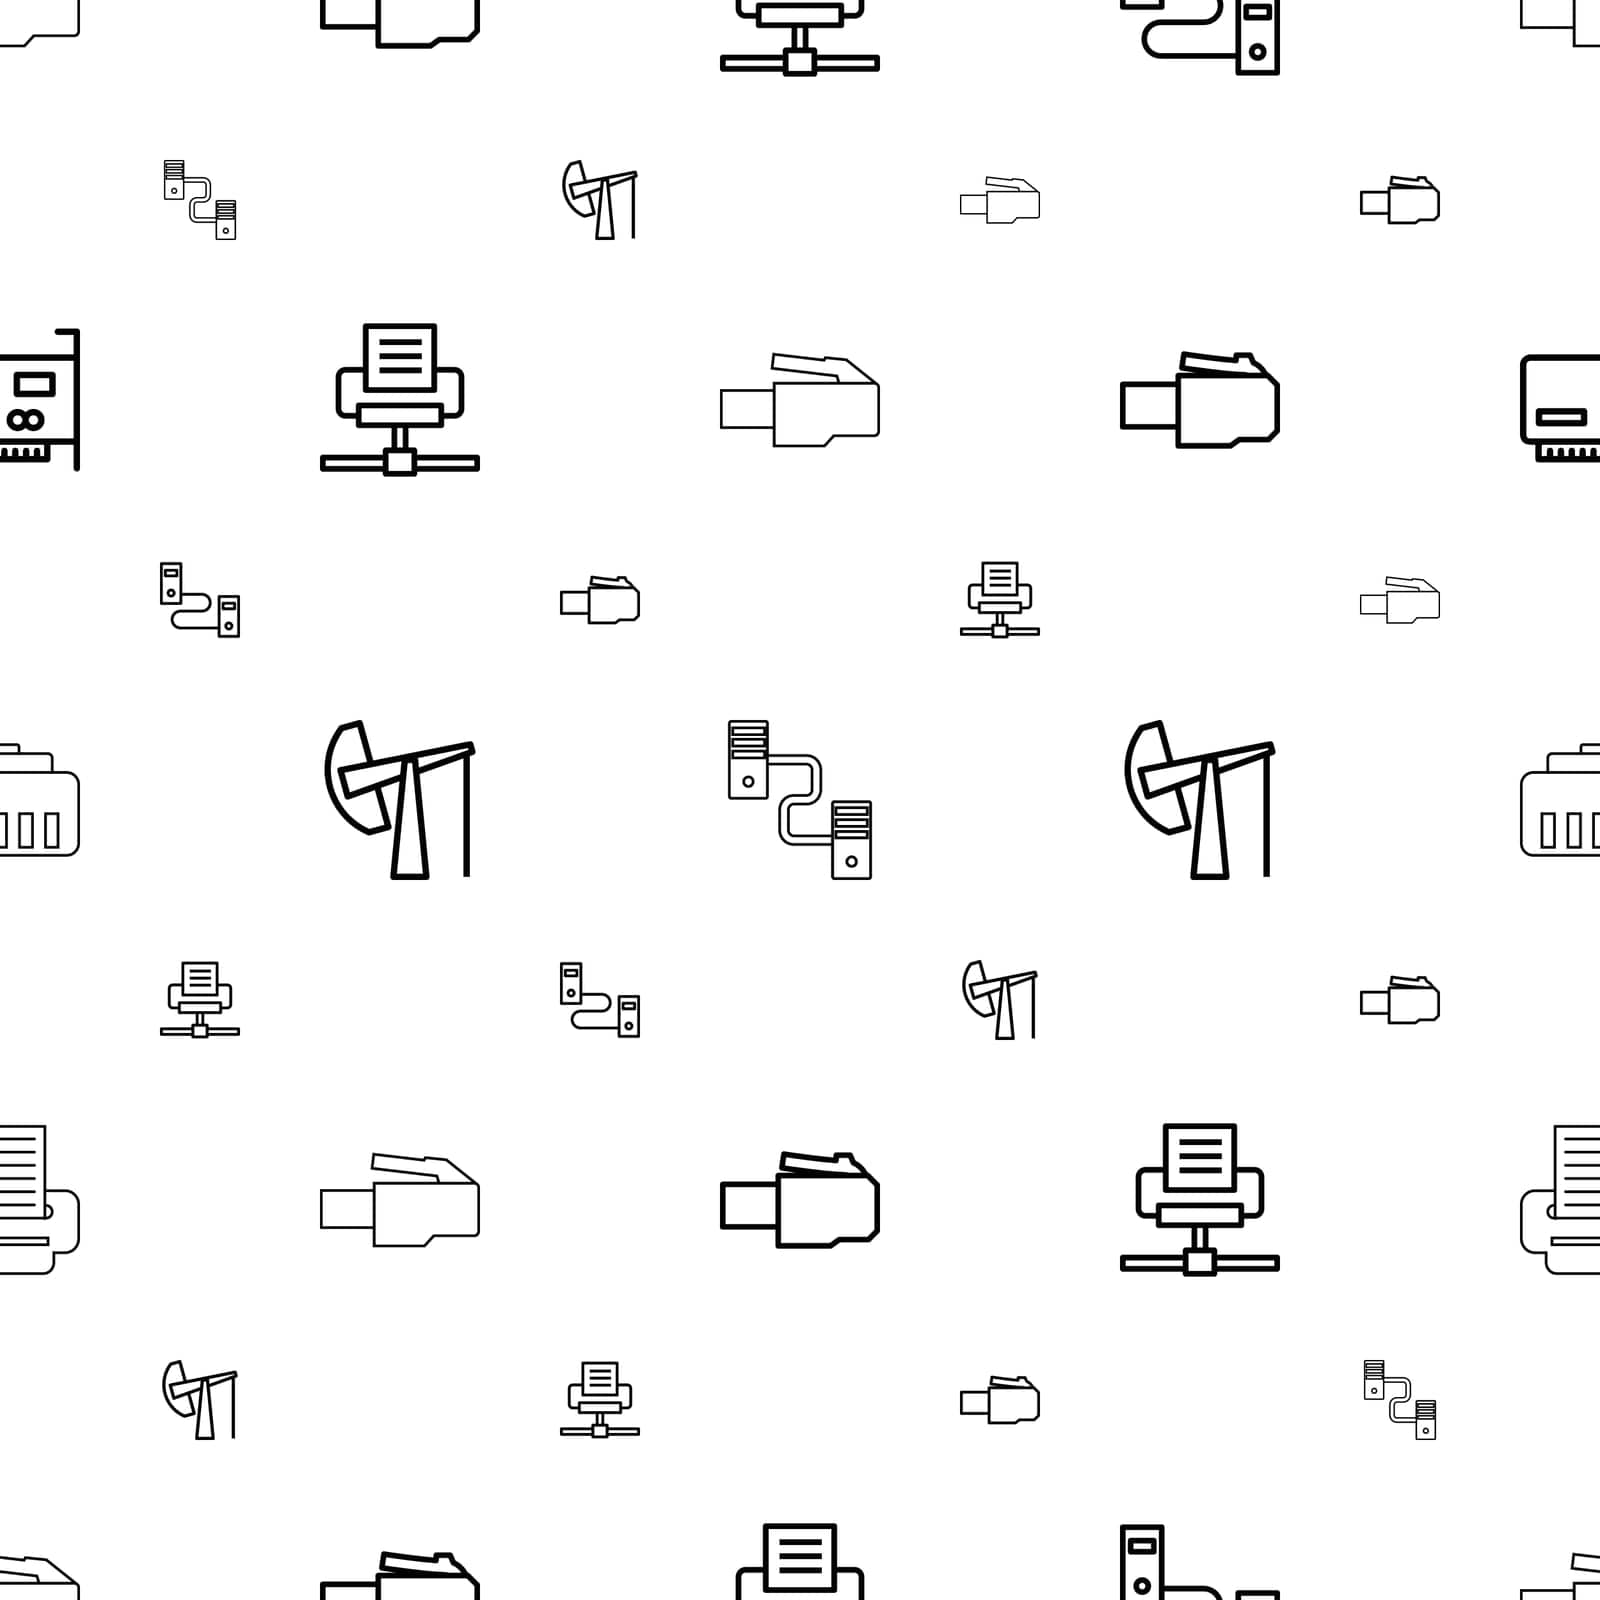 symbol,oilfield,data,usb,line,fuel,pattern,icon,sign,isolated,industry,platform,network,rig,computer,oil,white,design,connection,vector,power,cable,universal,connect,adapter,black,mobile,jack,cord,wire,charger,connector,derrick,phone,port,background,plug,internet by ogqcorp